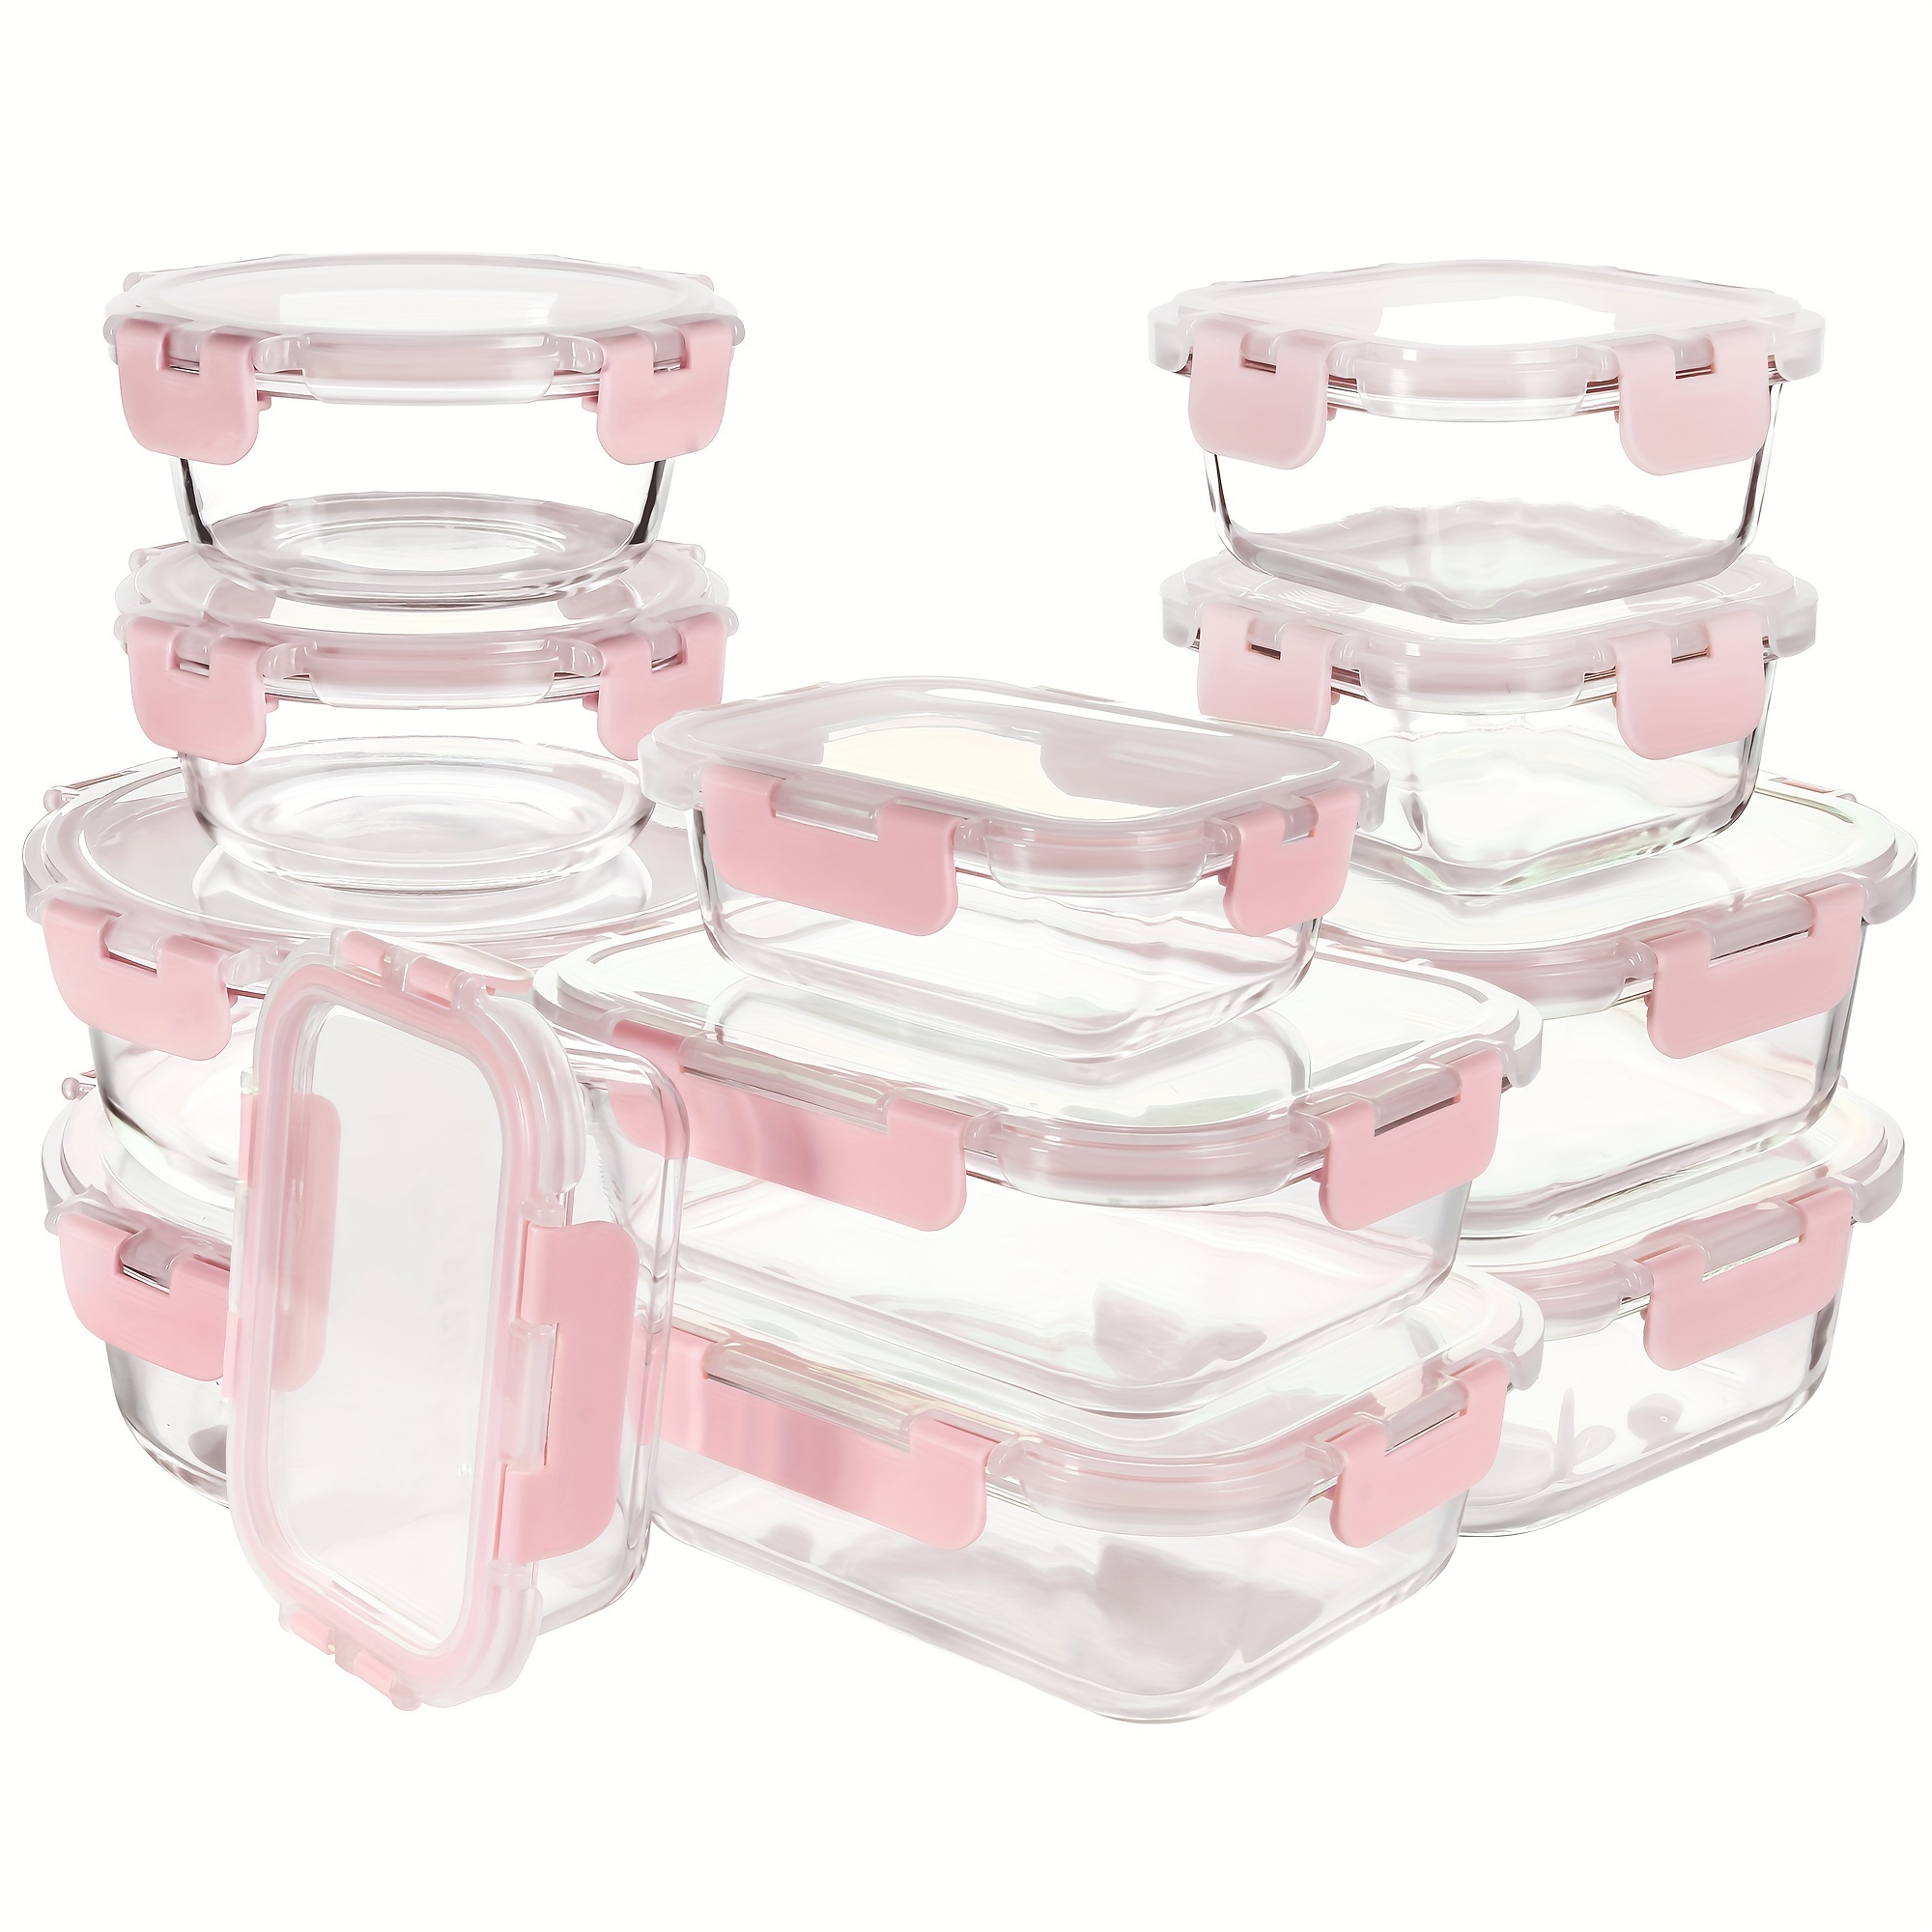 

12 Pack Glass Storage Containers With Lids, Leak-proof Meal Prep Containers, Dishwasher/freezer Safe Glass Food Storage Containers For Leftovers, To Go